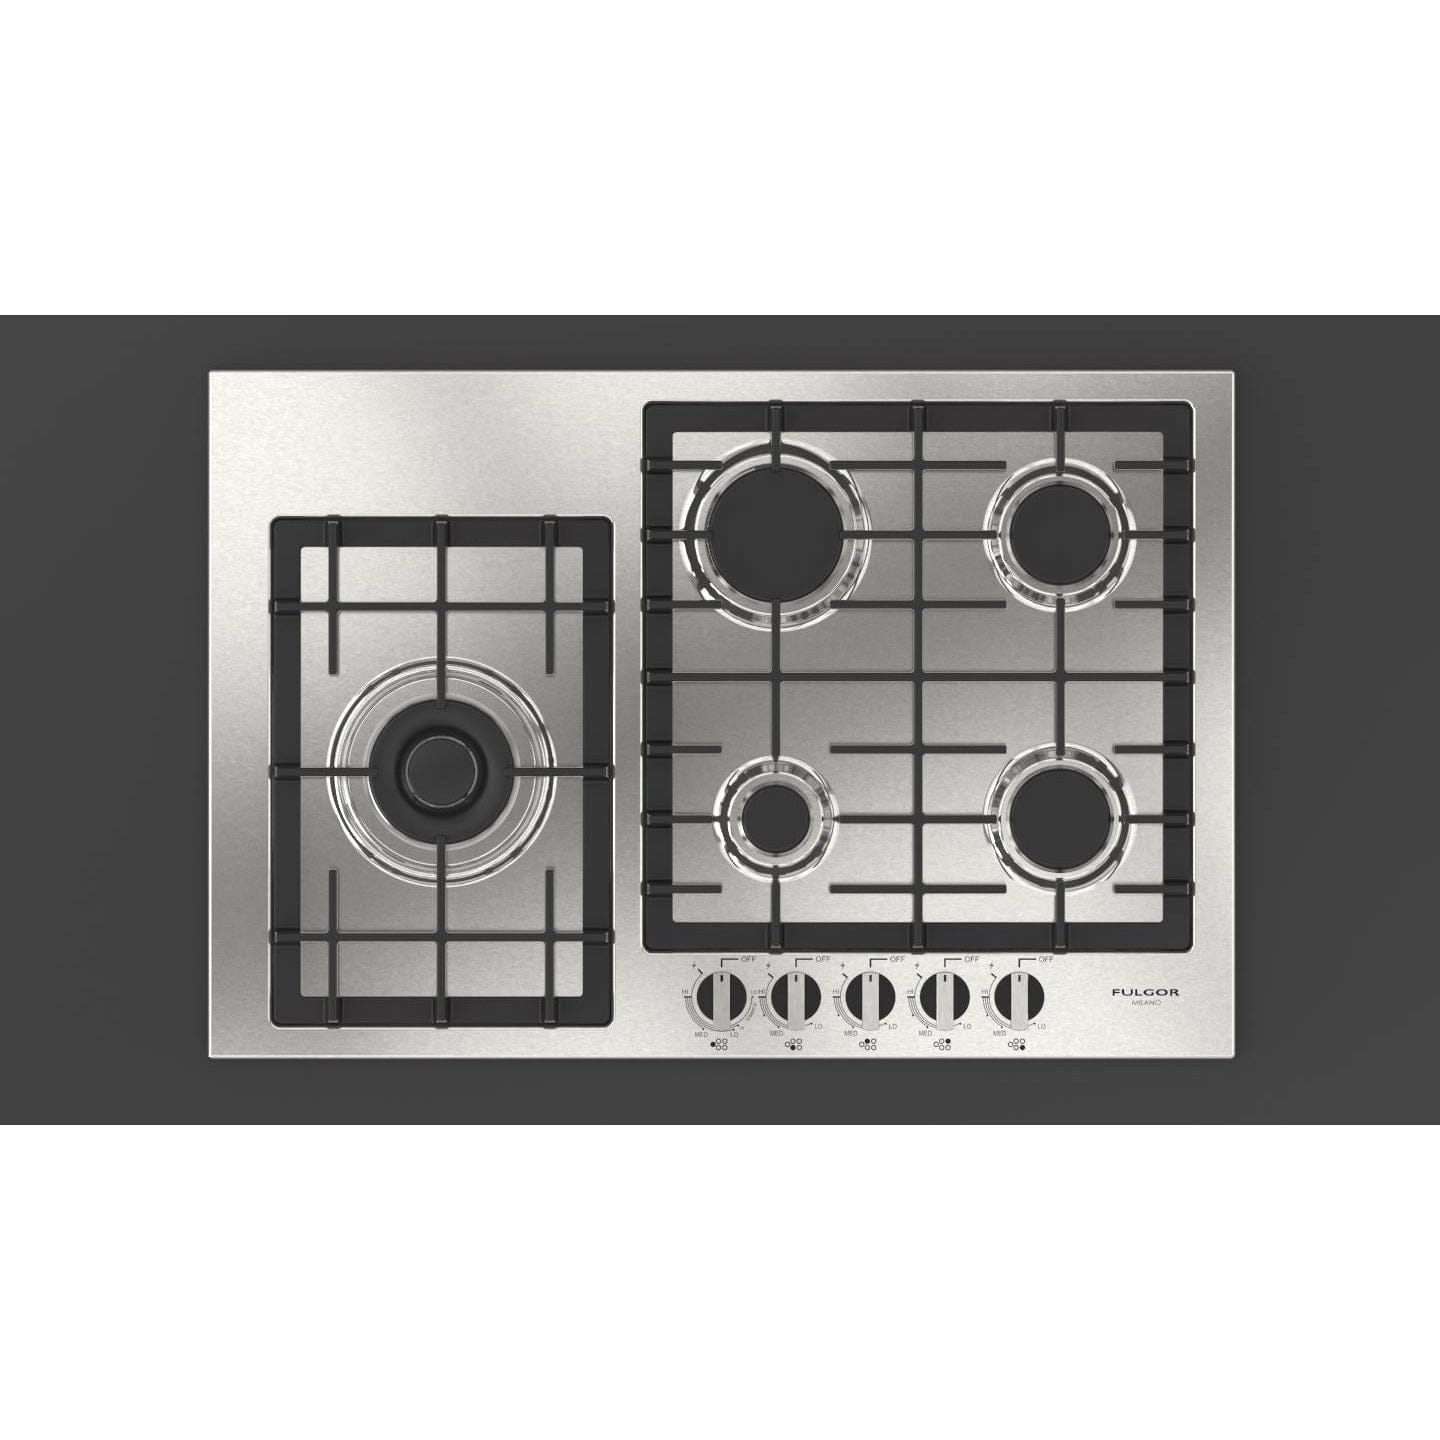 Fulgor Milano 30" Gas Cooktop with 5 European Sealed Burners - F4GK30S1 Cooktops F4GK30S1 Luxury Appliances Direct